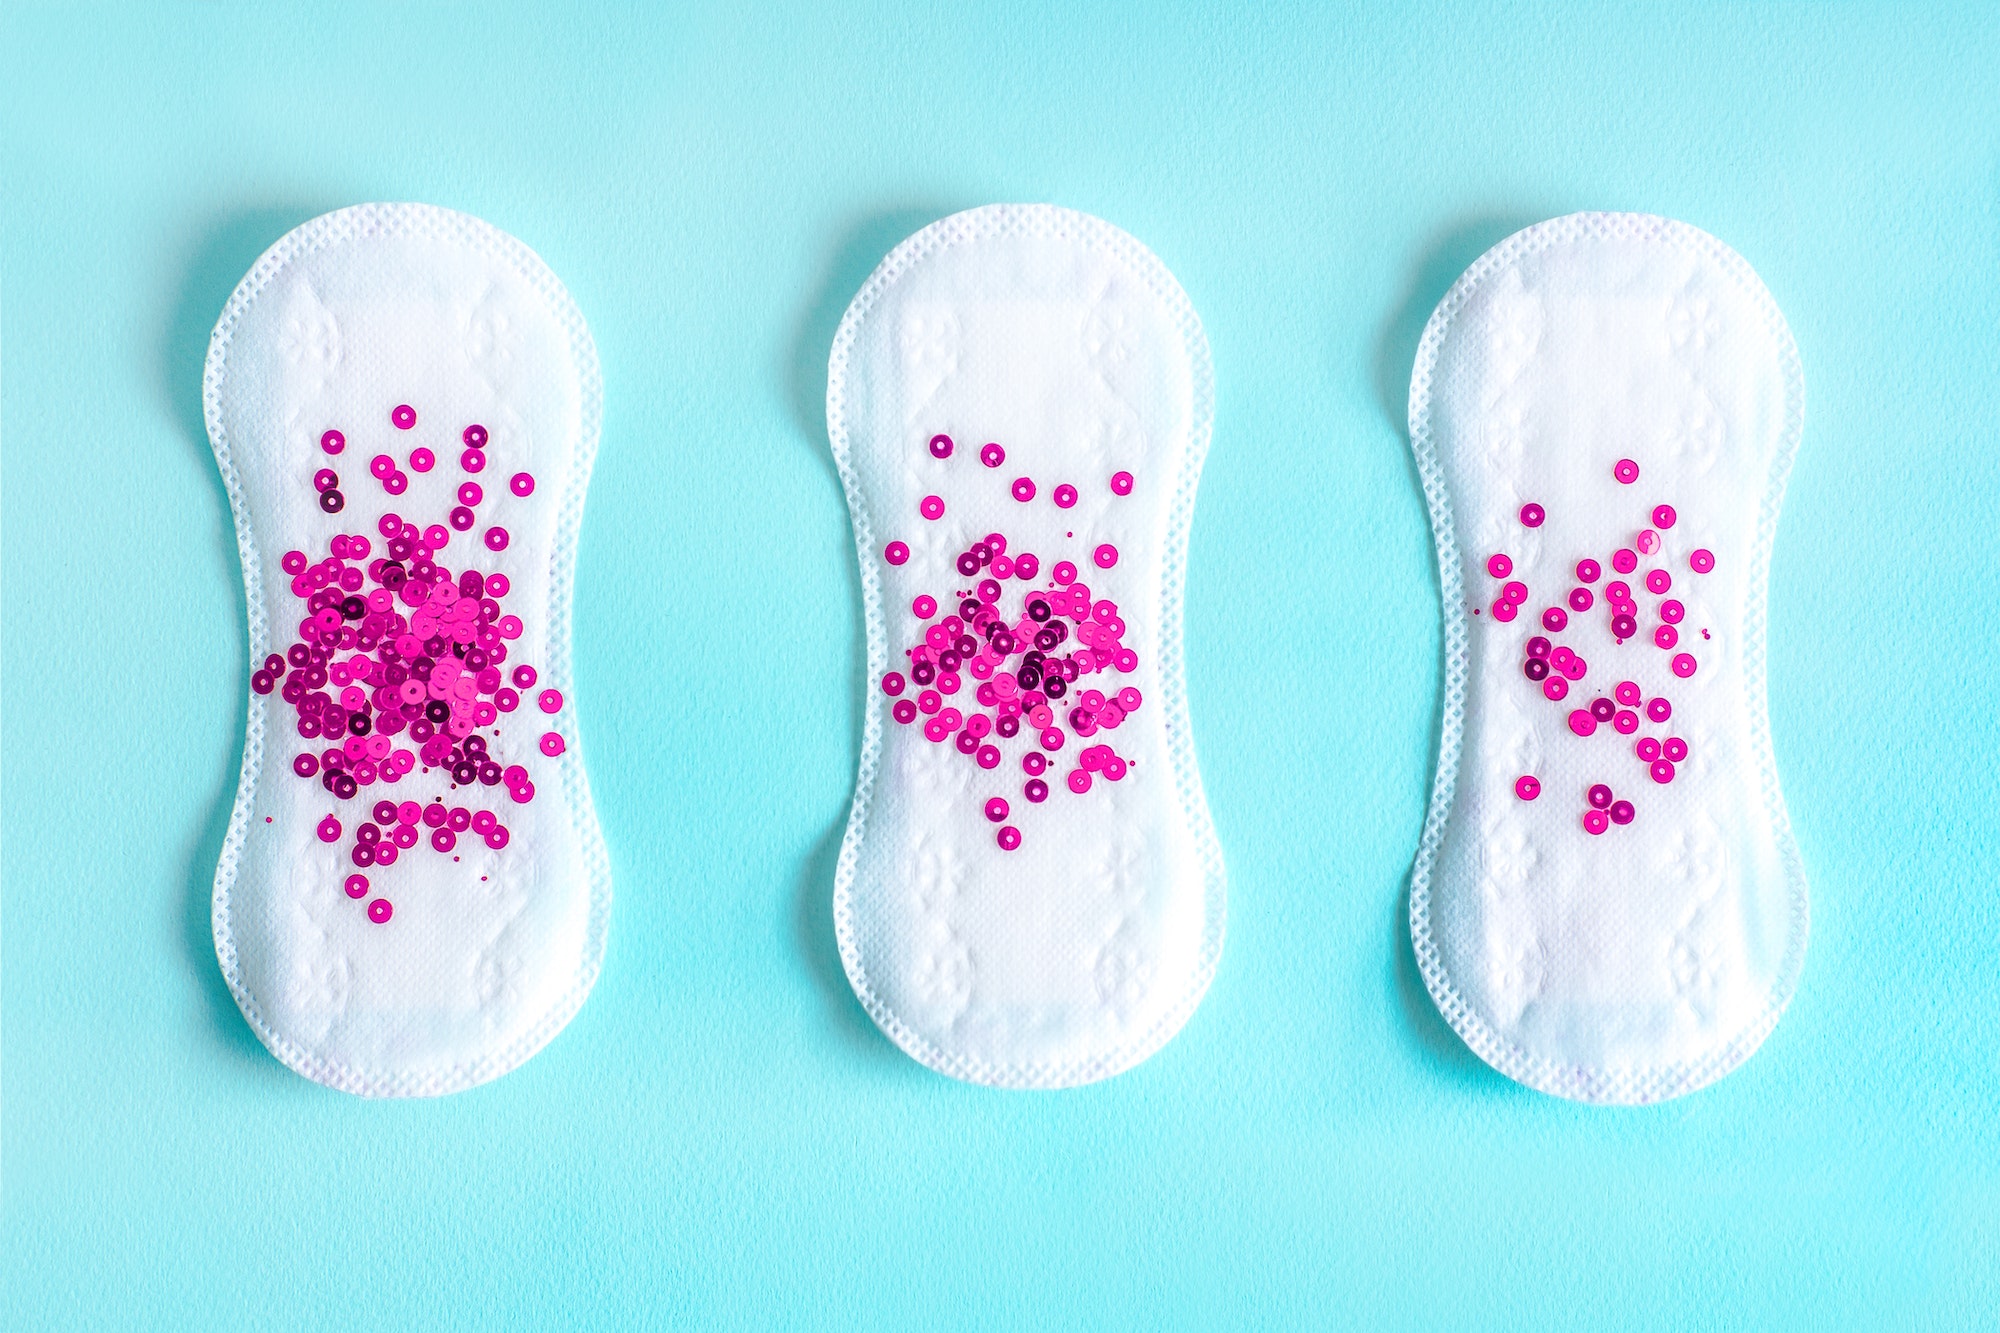 Postpartum Bleeding - Menstrual pad with bright purple sequins on a blue colored background.